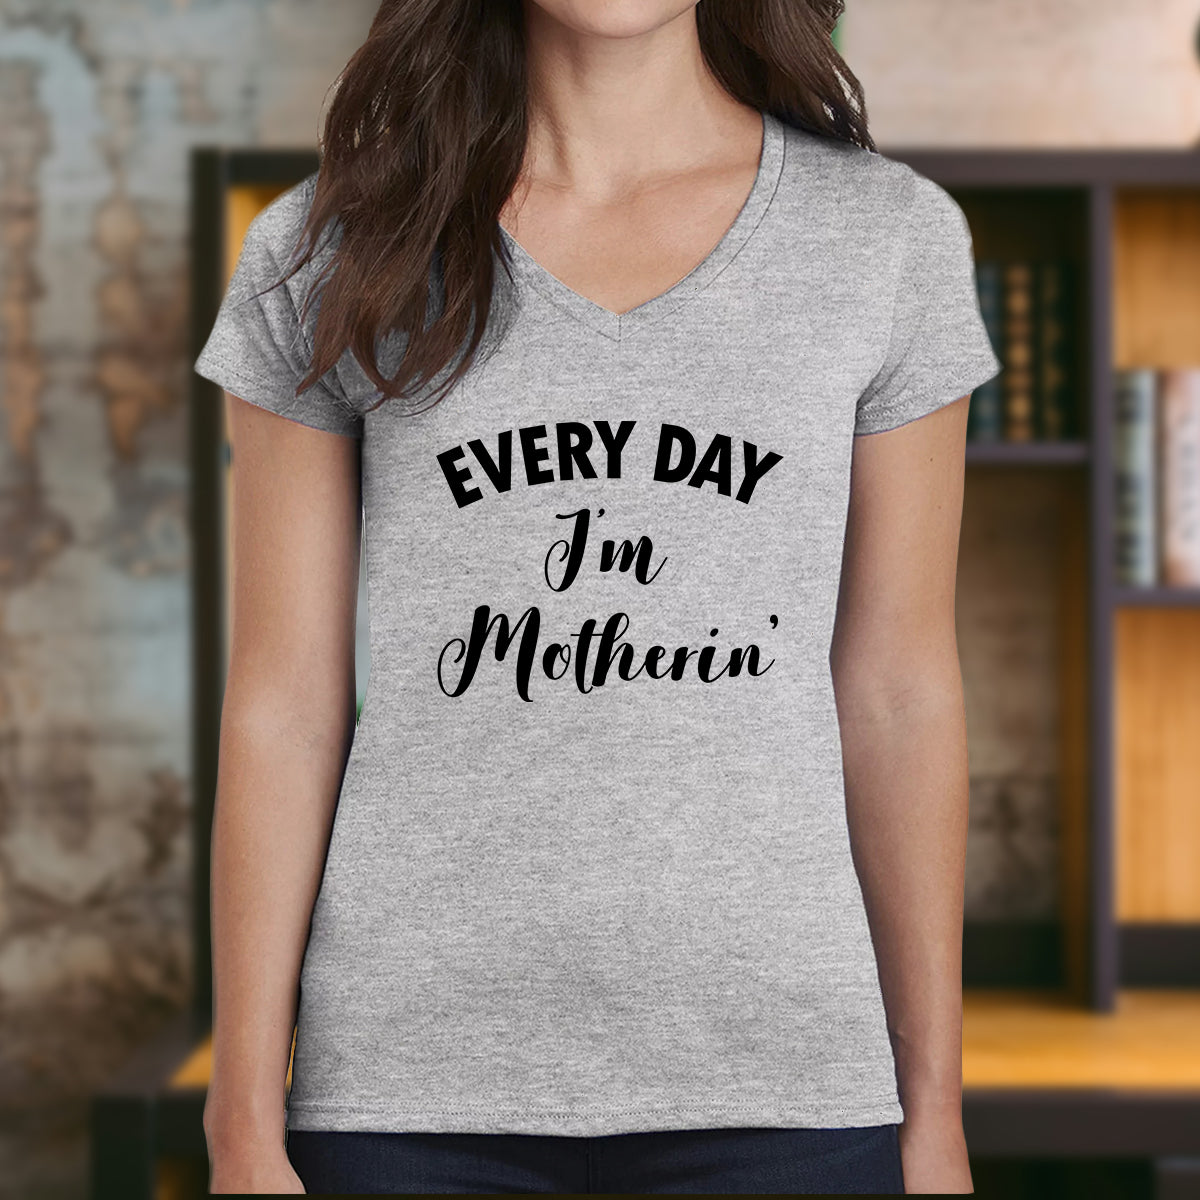 "Every Day I'm Motherin" Premium Midweight Ringspun Cotton T-Shirt - Womens Fits